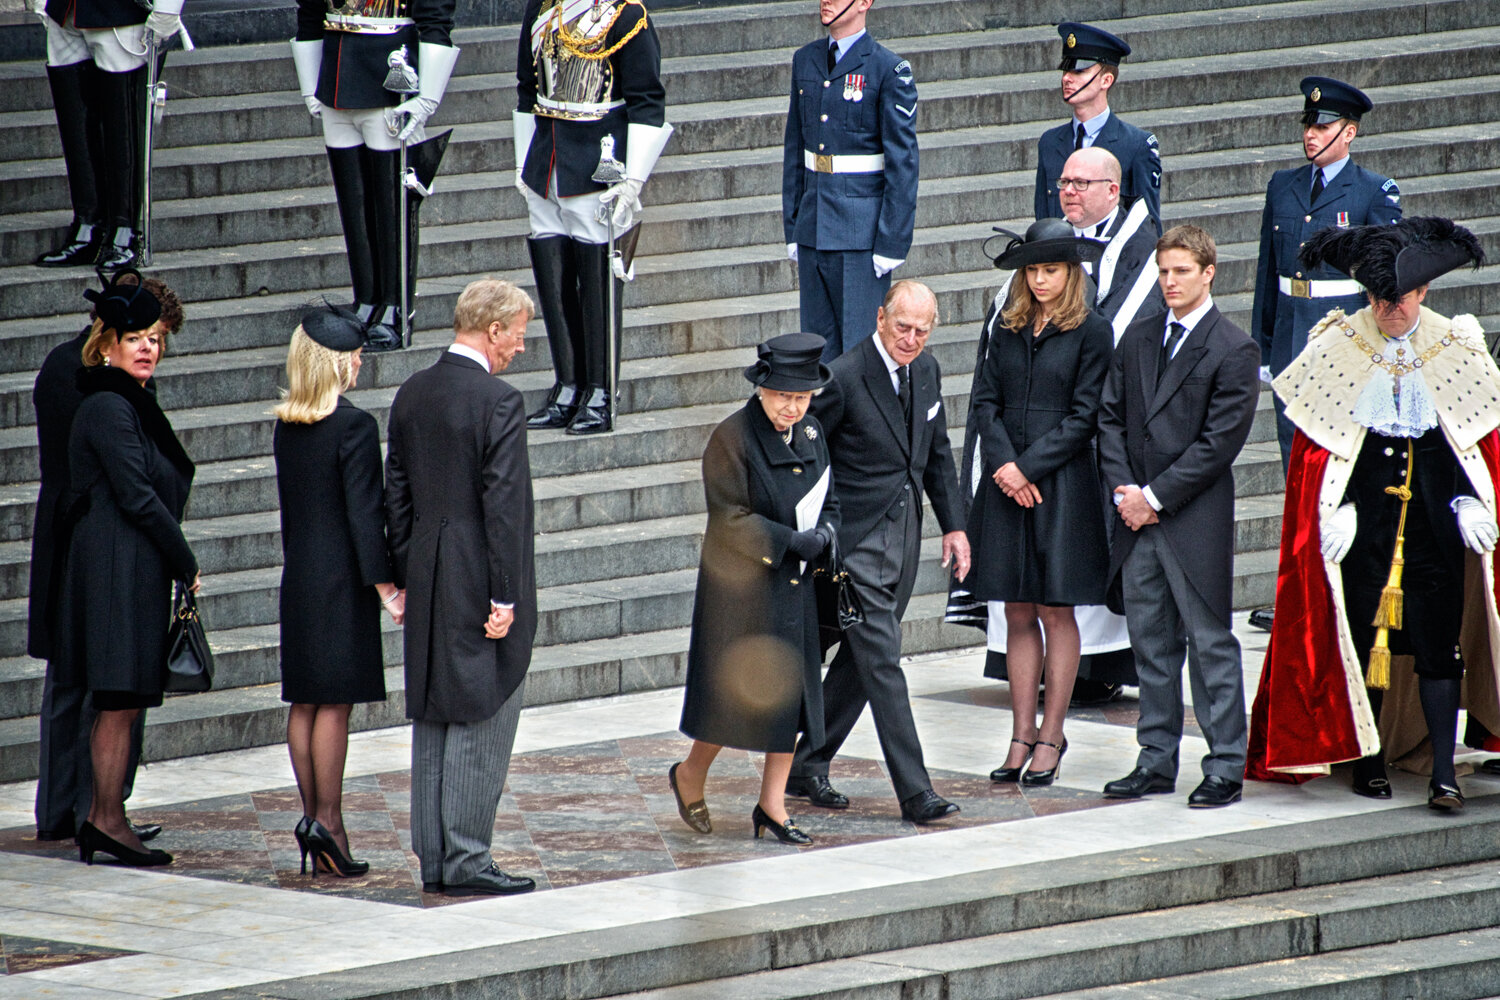  The Queen and Price Phillip leaving after the memorial service 